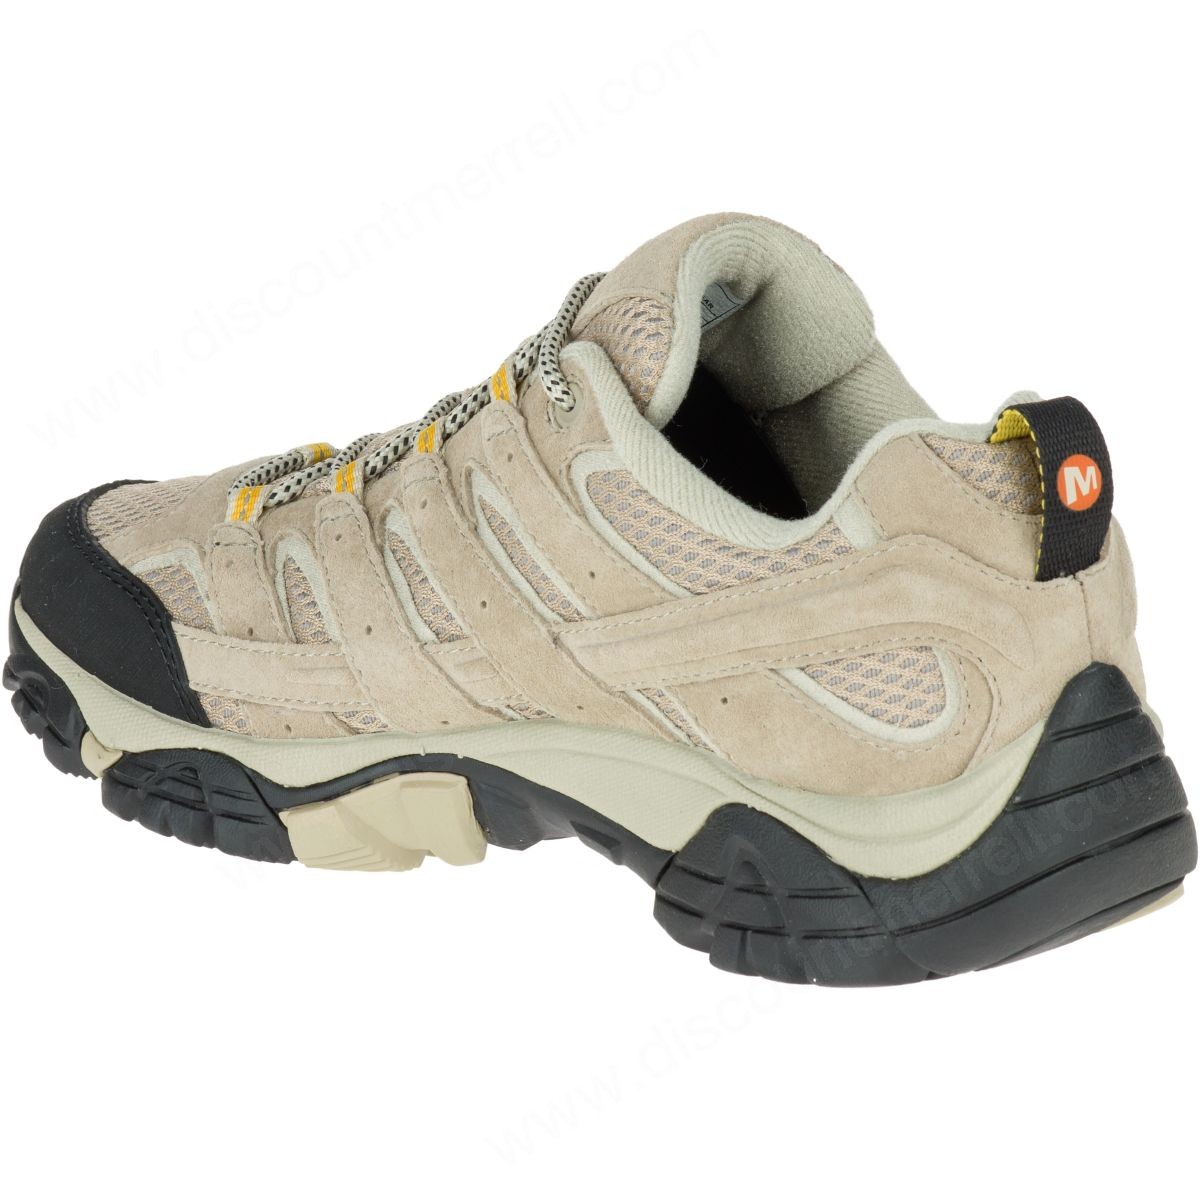 Merrell Woman's Moab Mother Of All Boots™ Ventilator Wide Width Taupe - -6